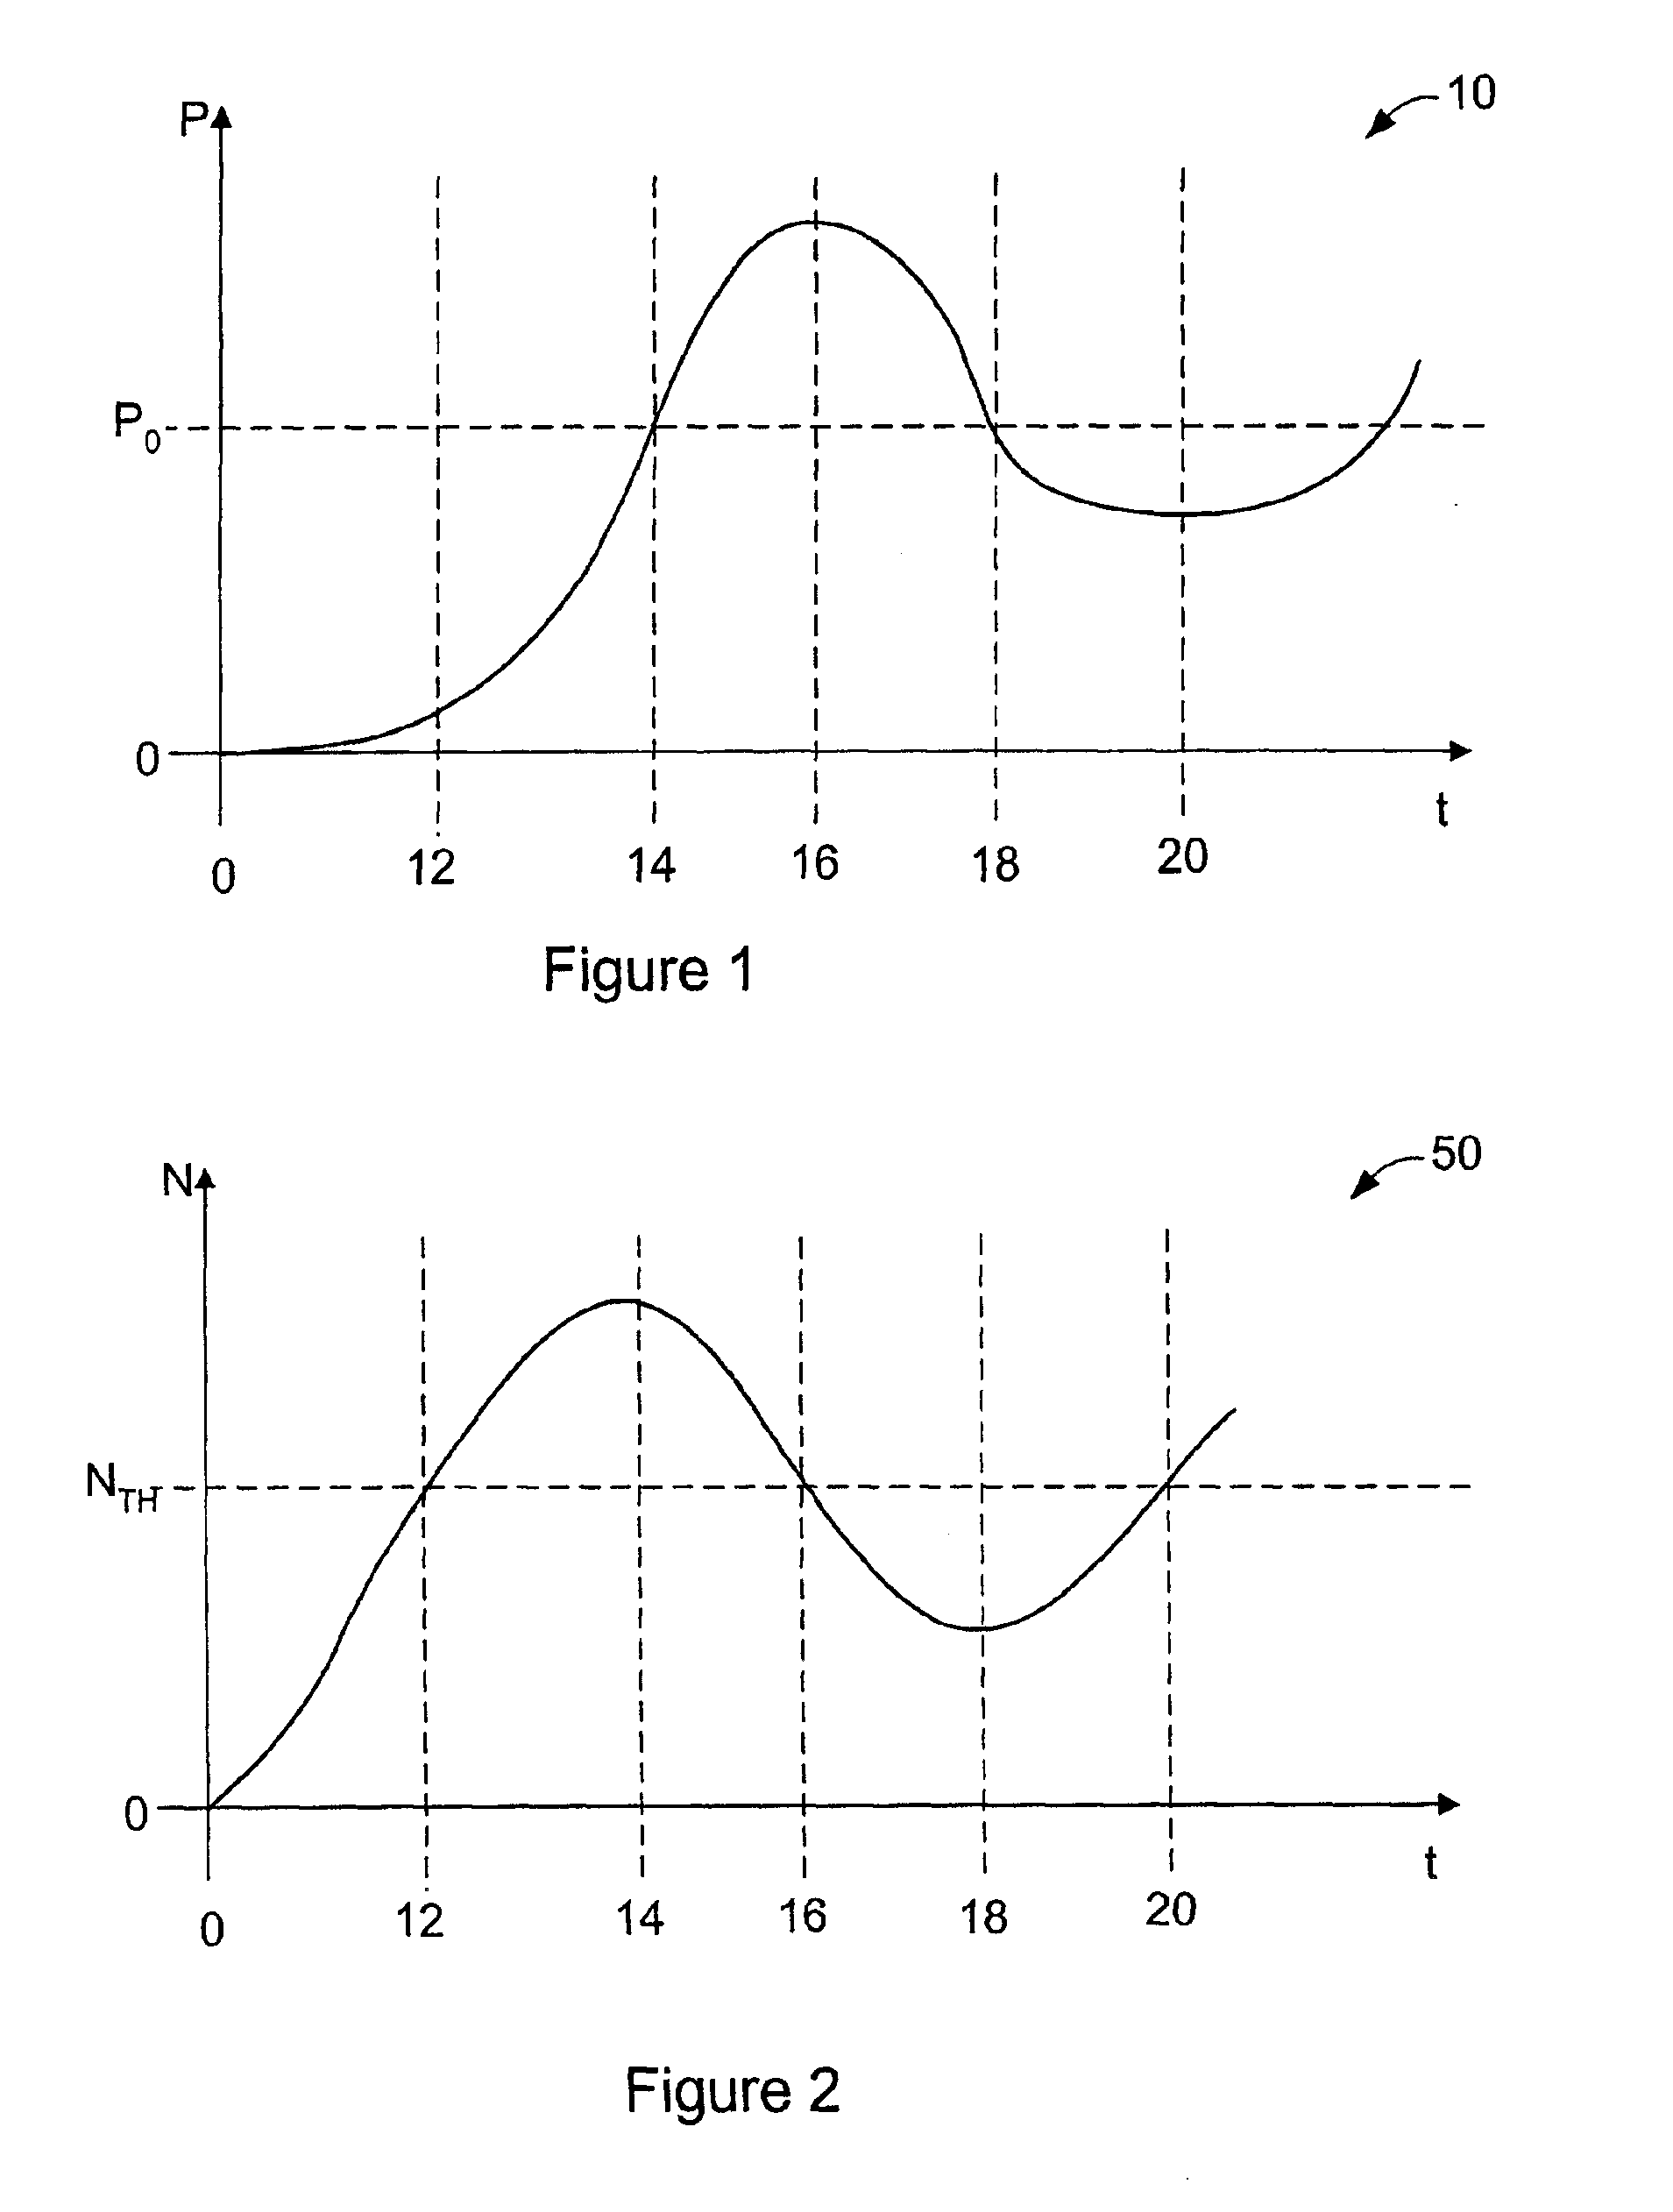 Optical amplifier with damped relaxation oscillation